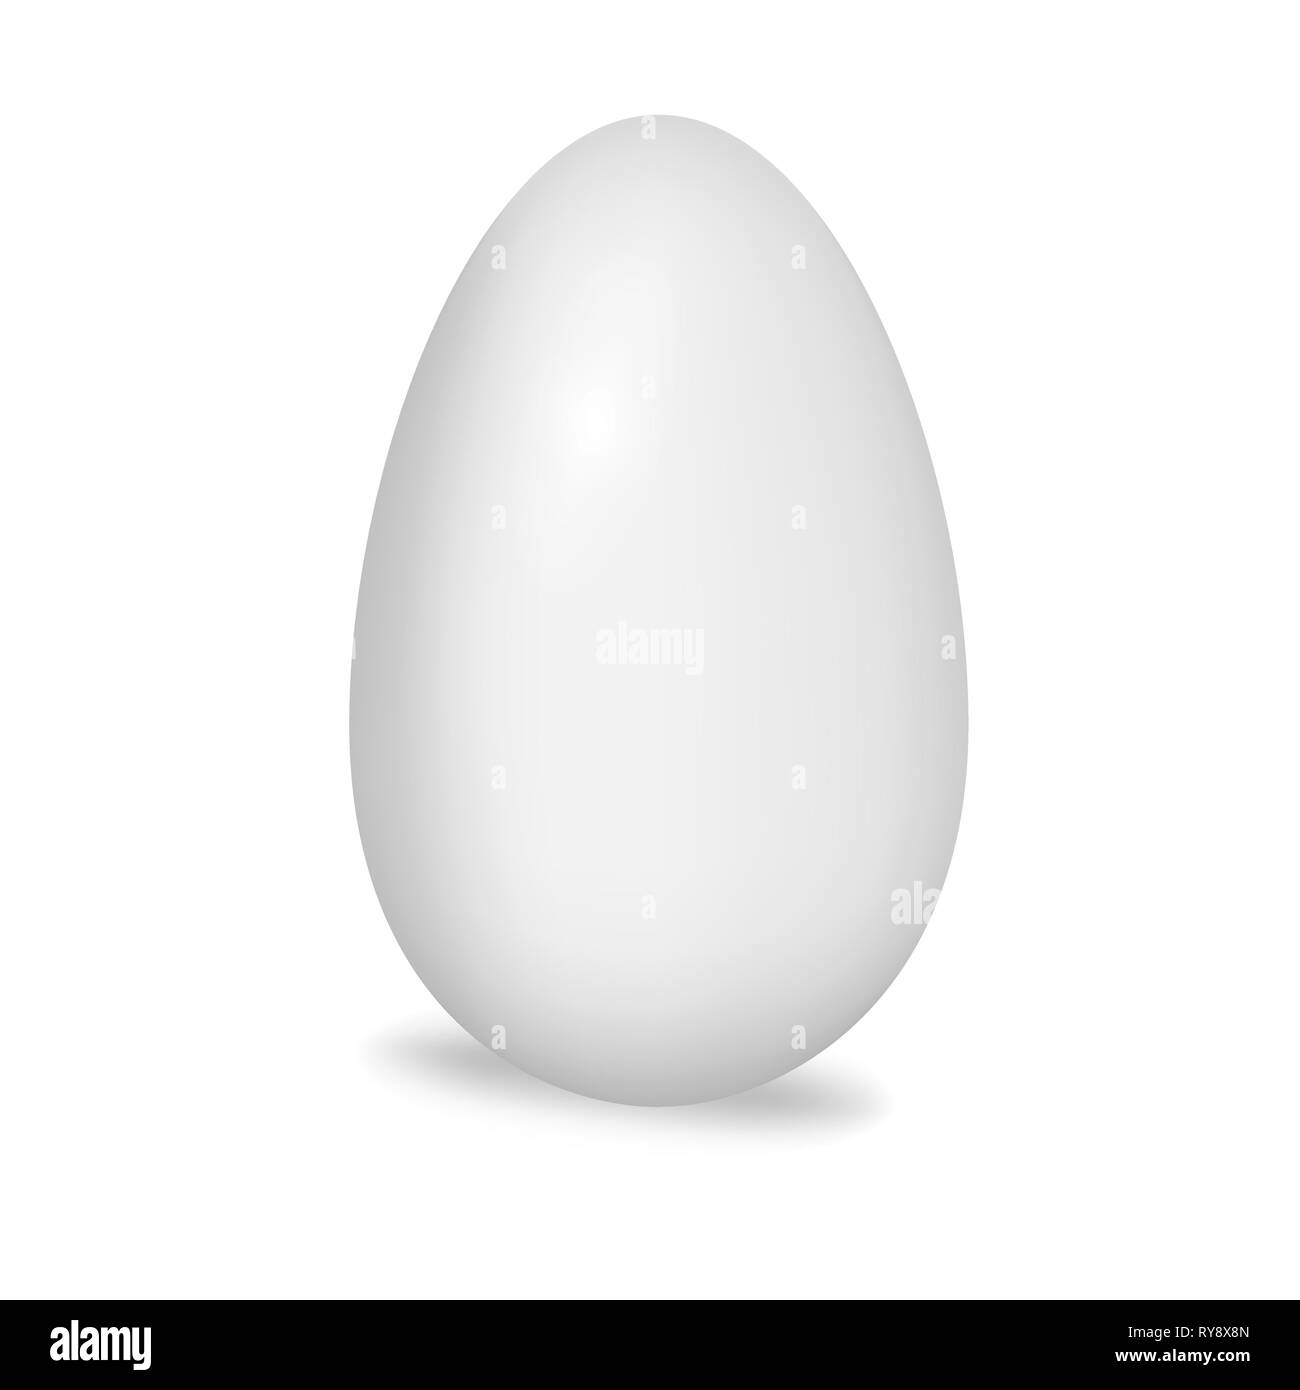 Single standing blank egg isolated on white background, realistic vector illustration Stock Vector